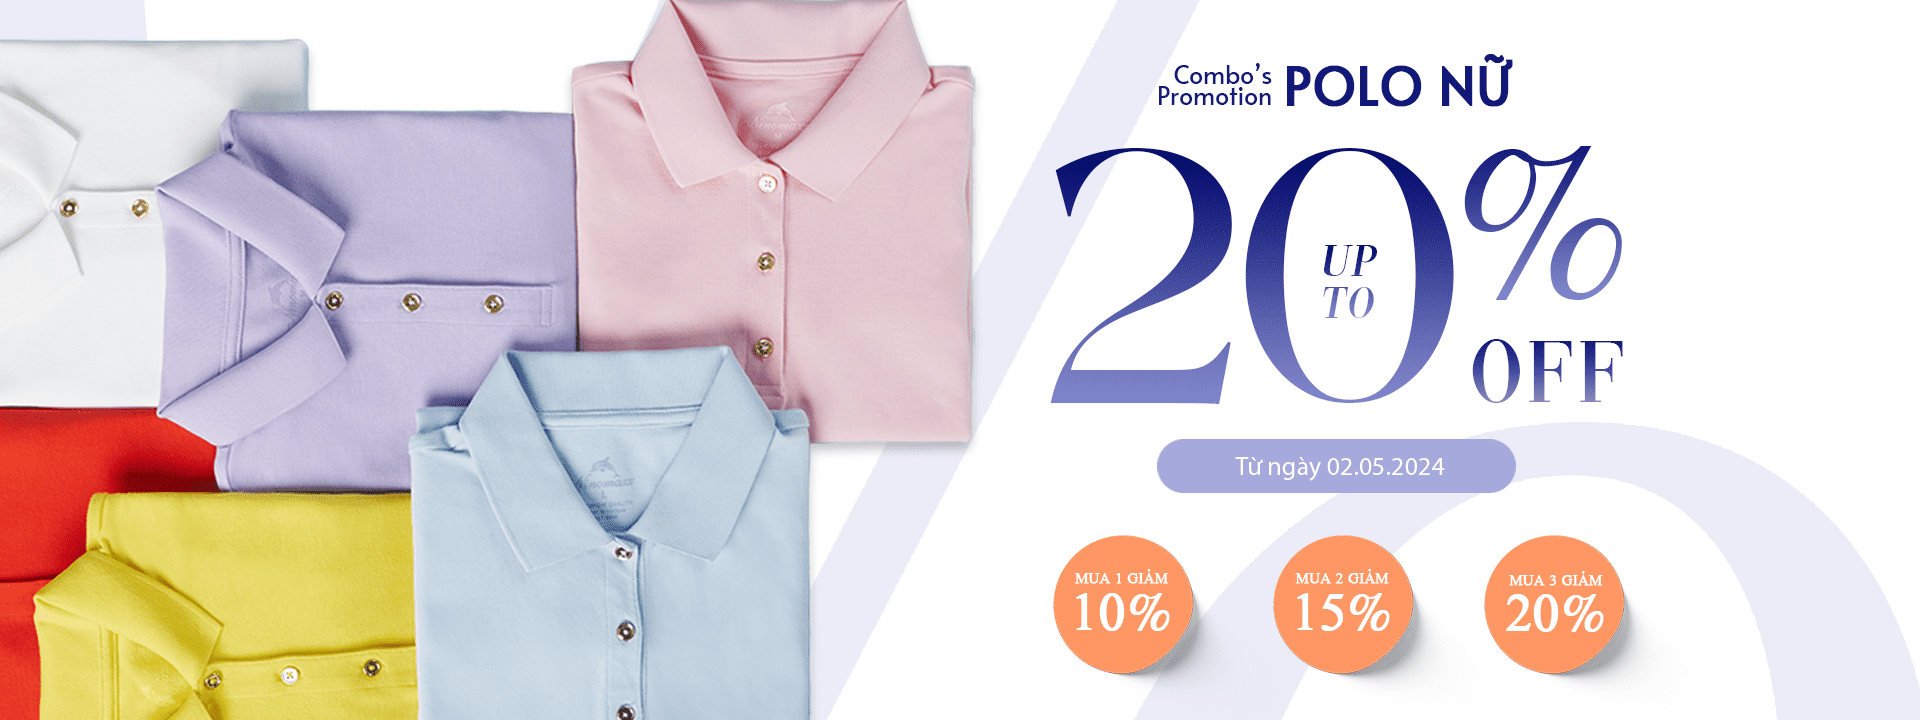 Combo's Promotion Polo Nữ Sale Upto 20%